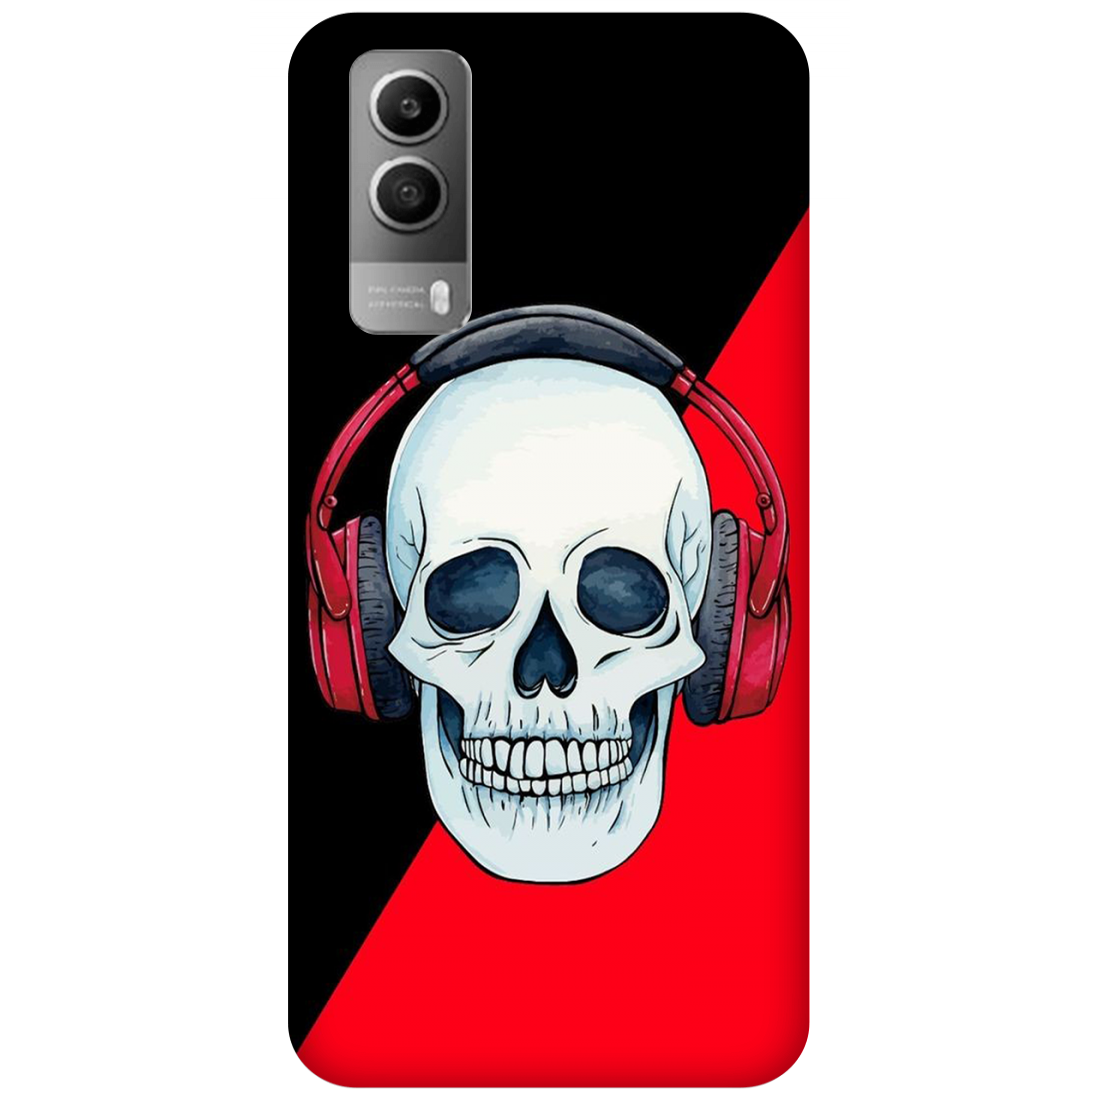 Red Headphones on Blurred Face Case Vivo Y53s